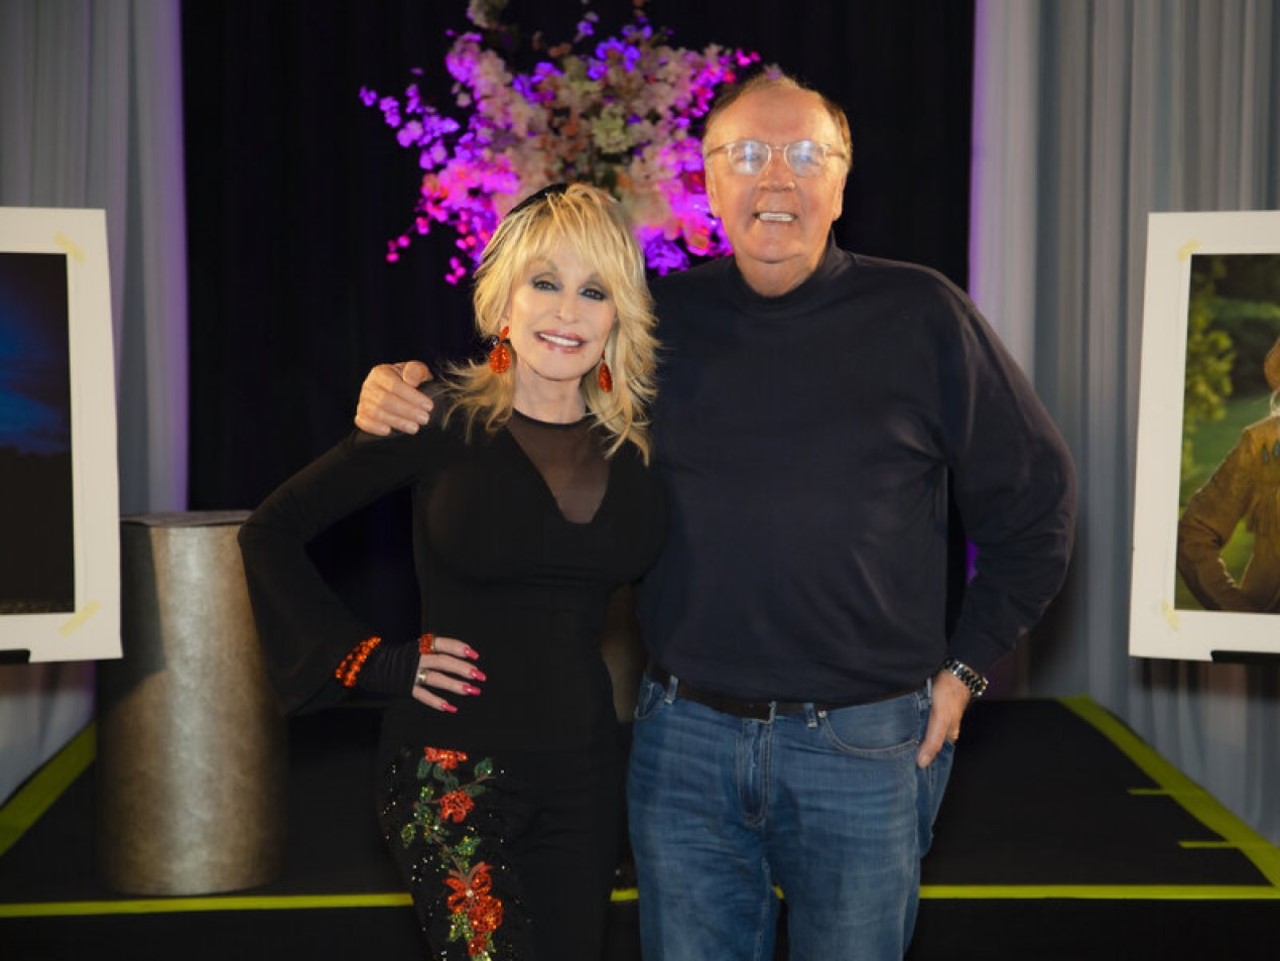 Dolly Parton and James Patterson pose for a picture in August 2021. Their new novel, Run, Rose, Run, is about an aspiring country singer in Nashville.